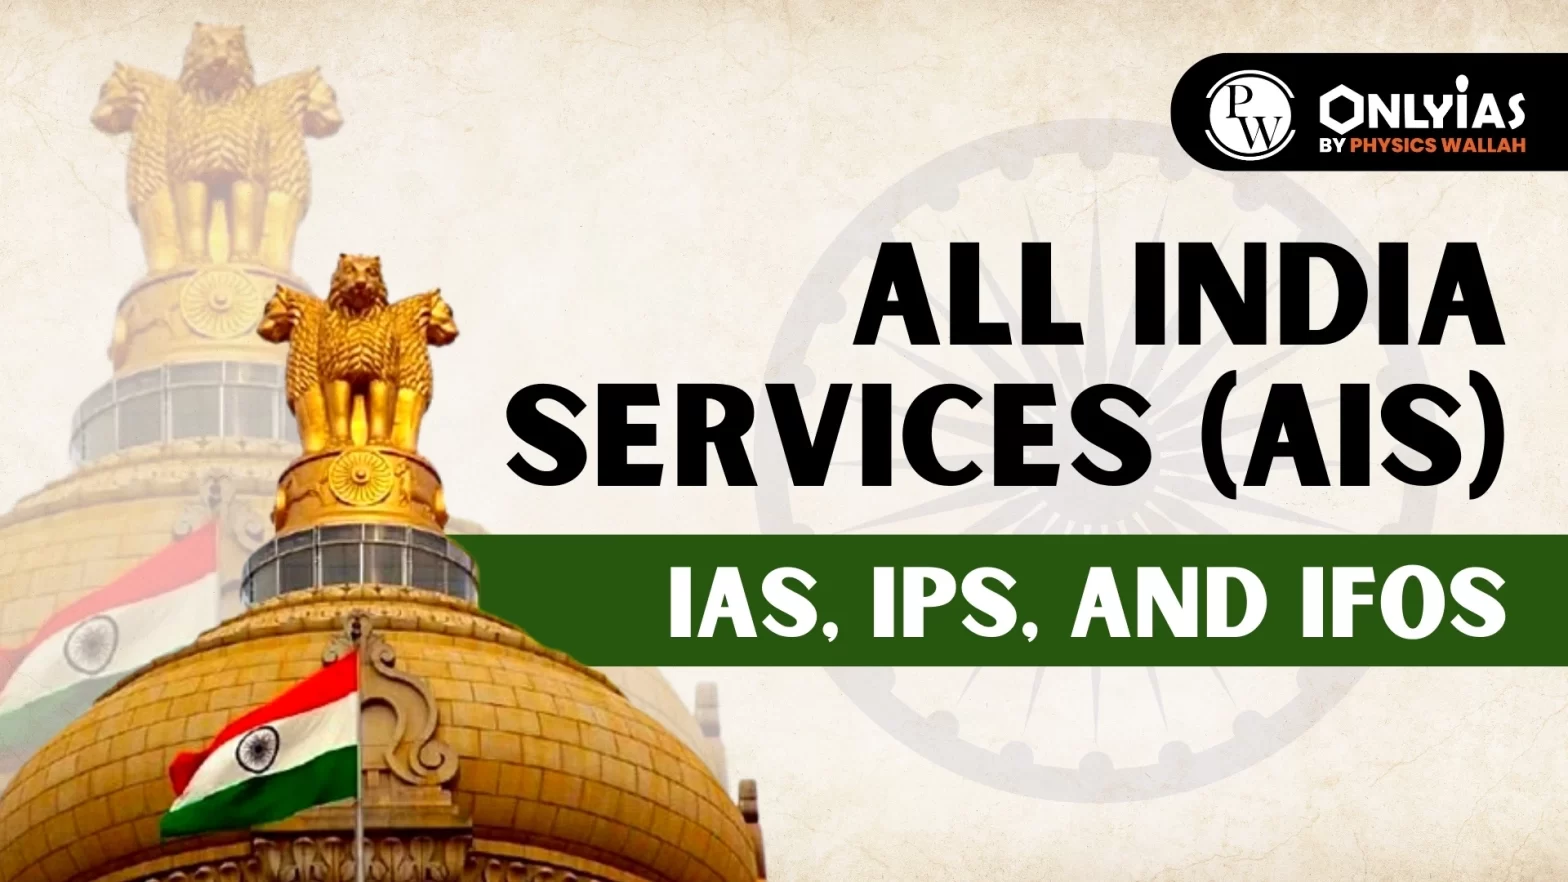 All India Services (AIS): IAS, IPS, and IFoS